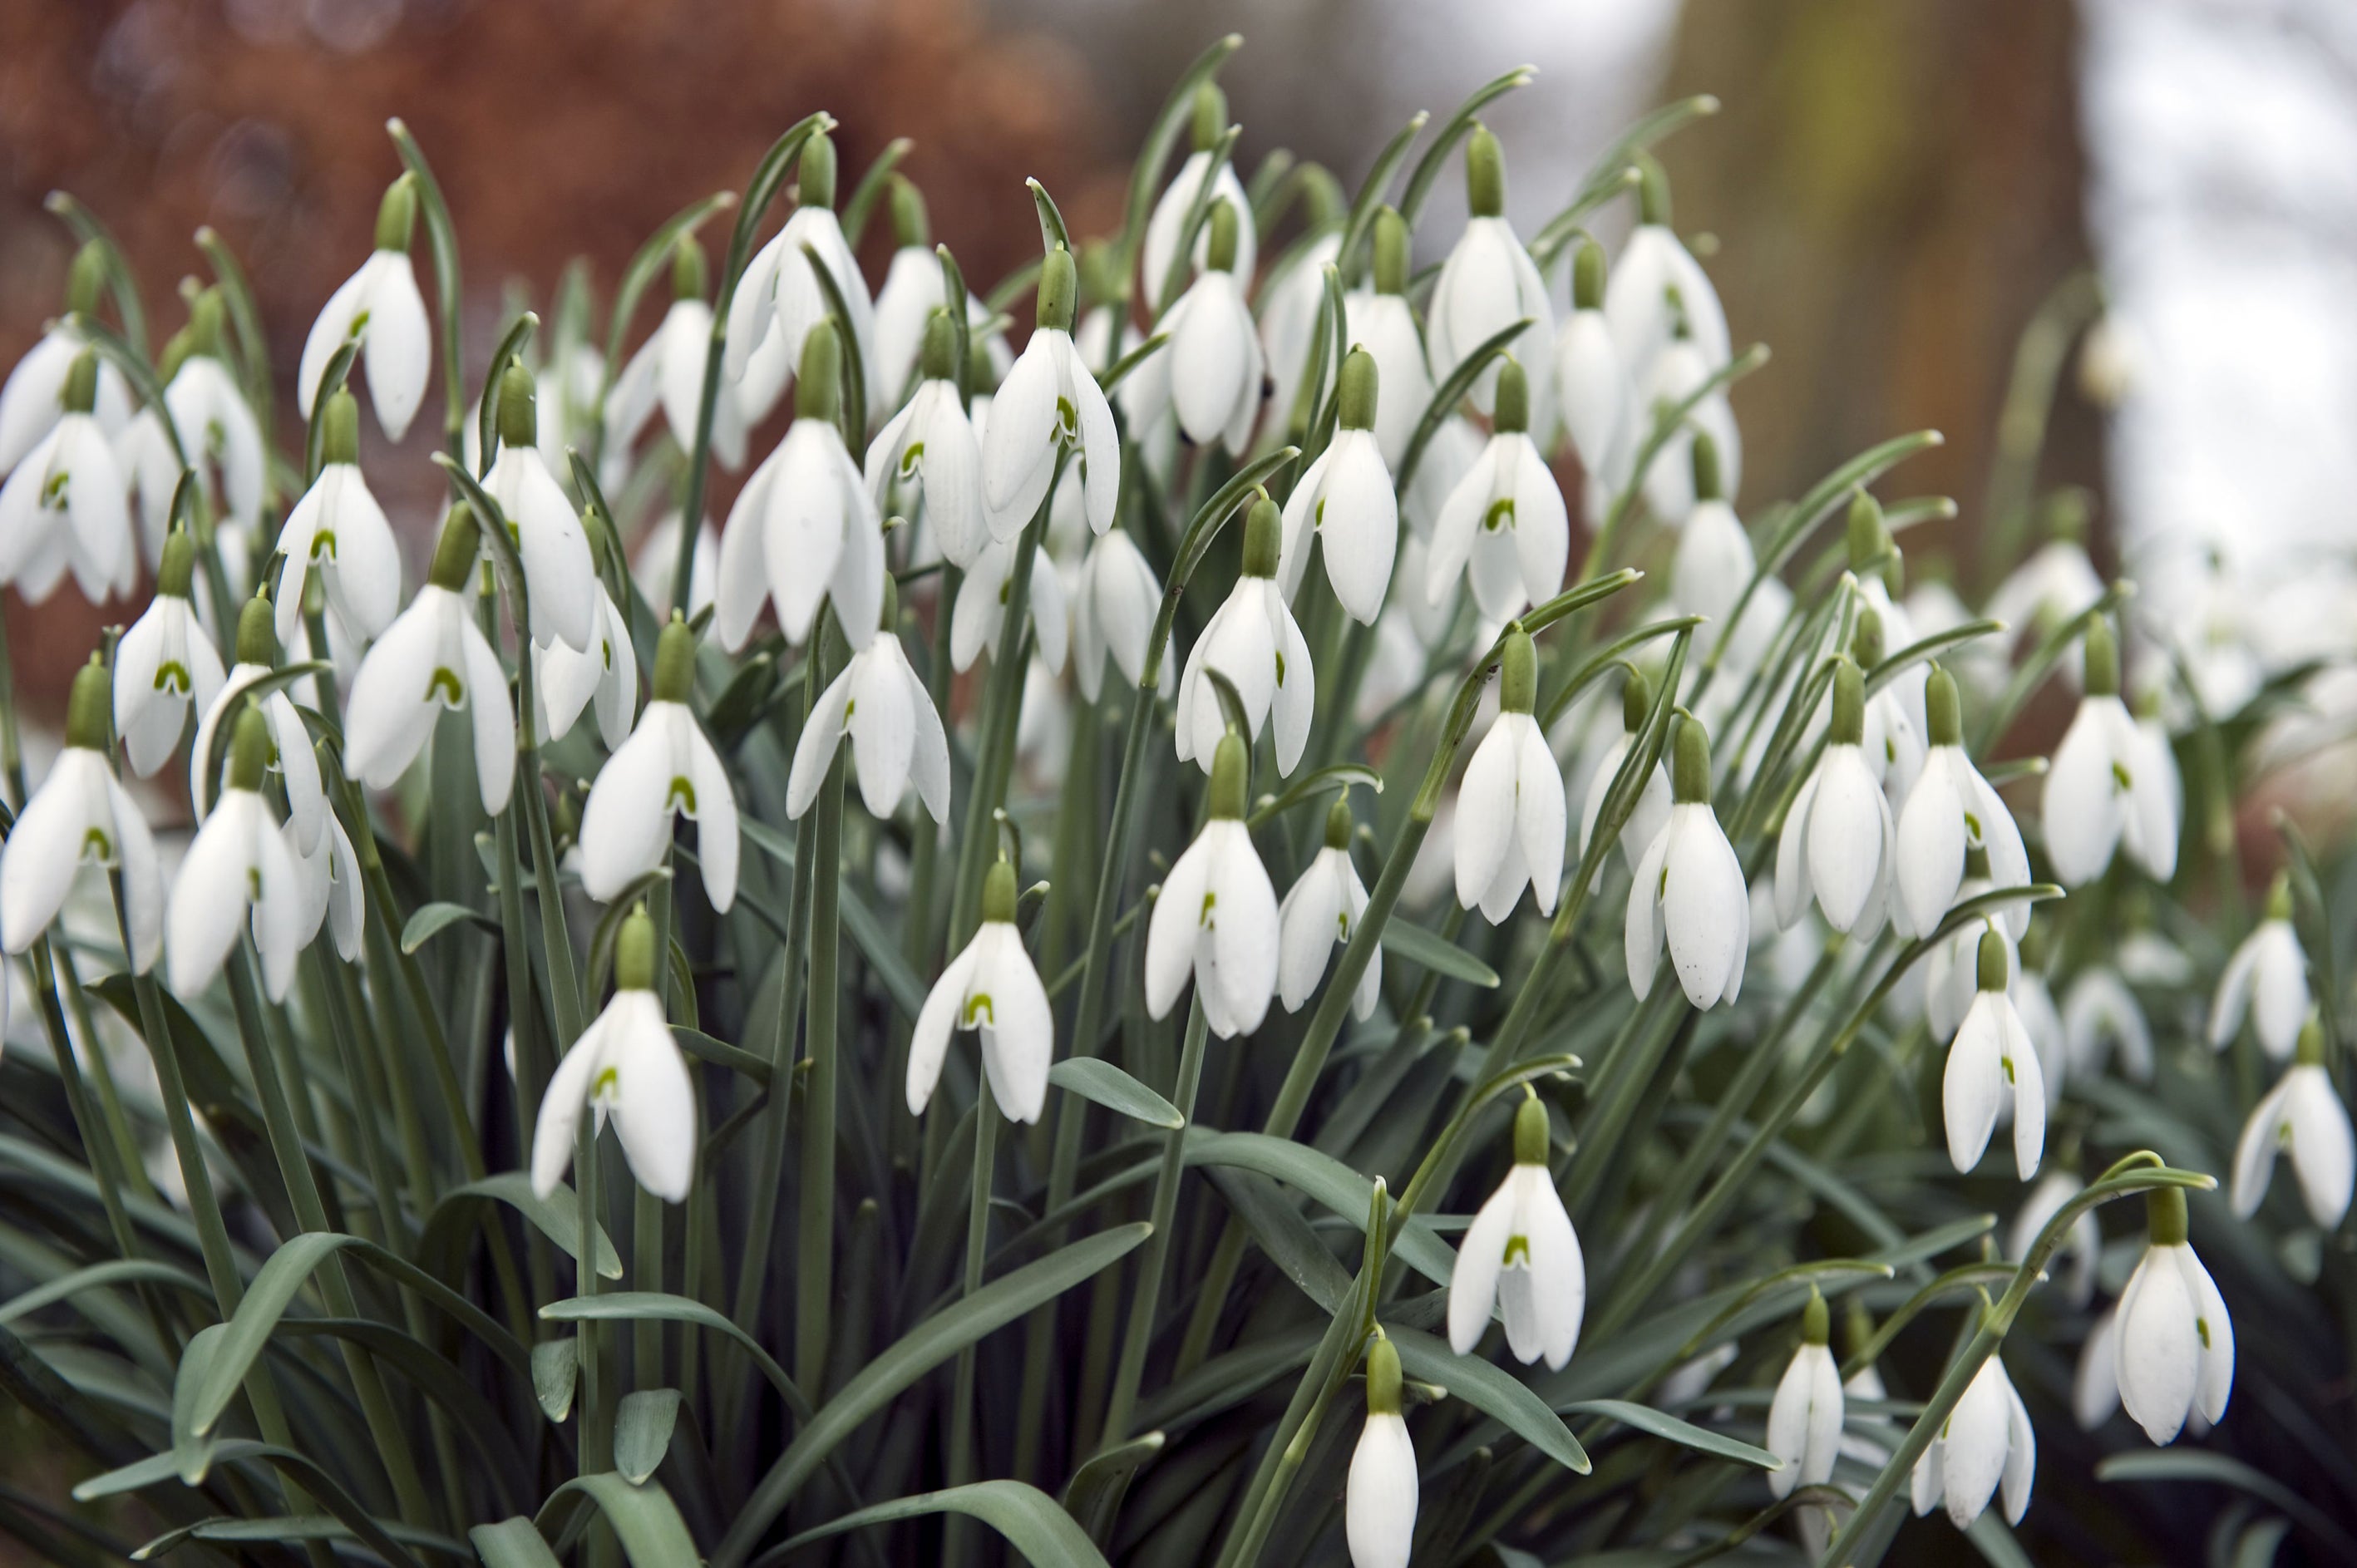 Snowdrops are some of the earliest spring flowers to appear in the UK